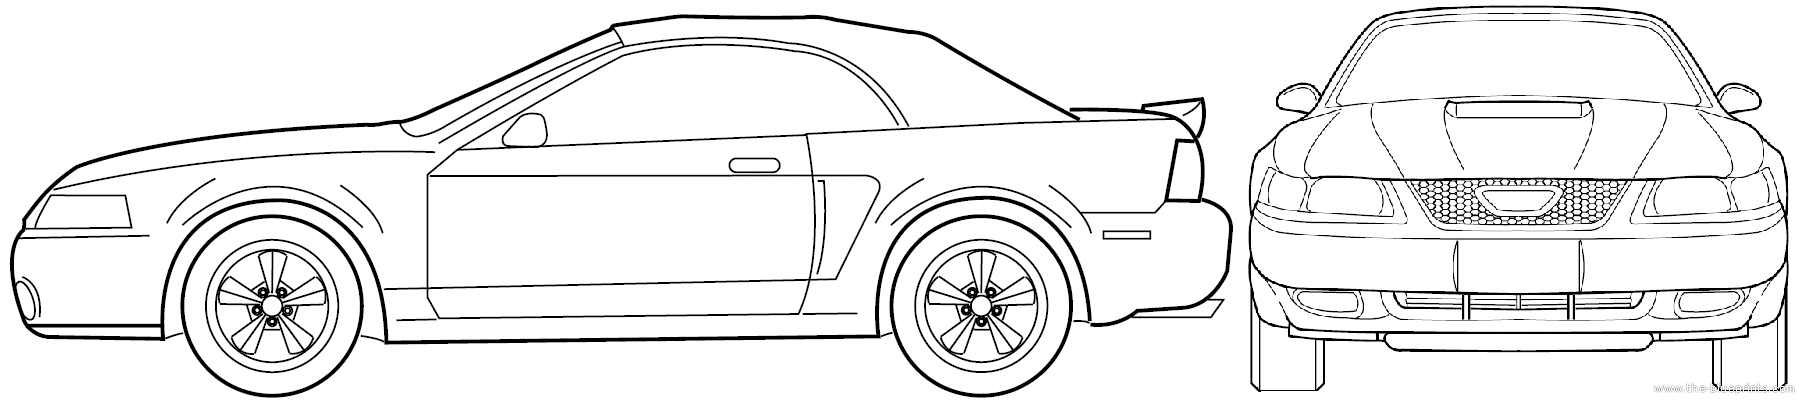 2000 Ford mustang drawings